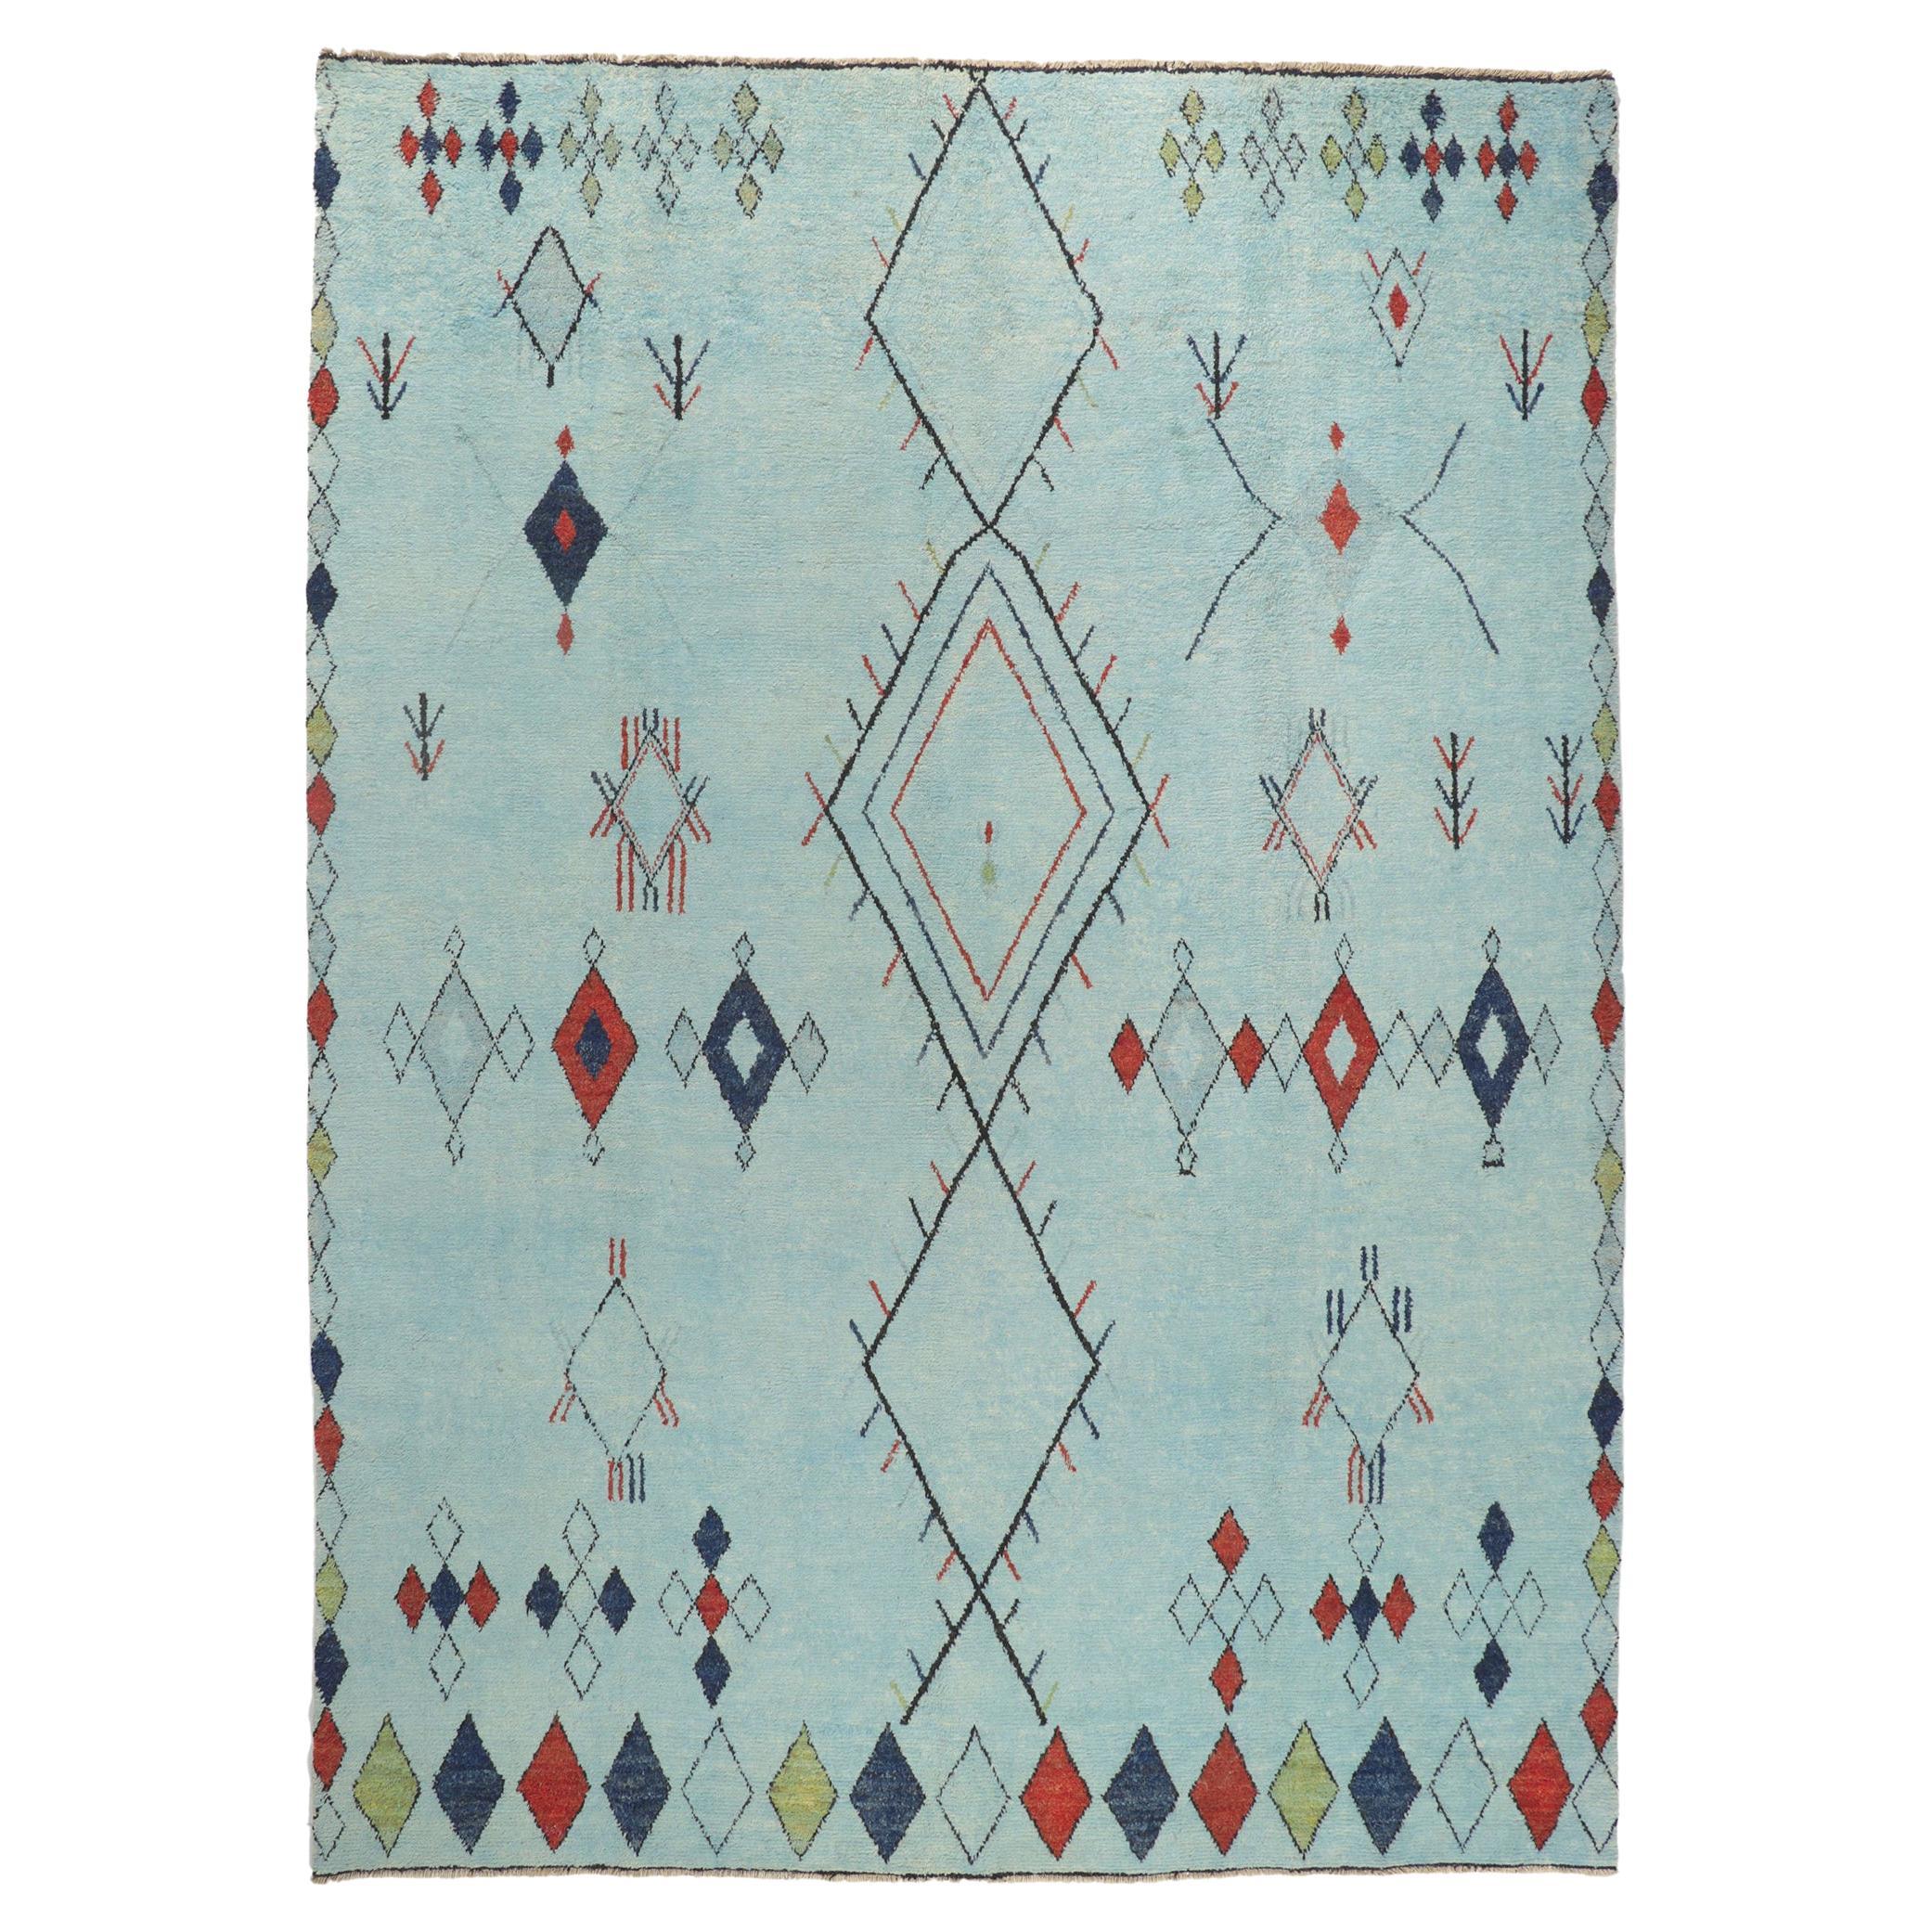 New Aqua Blue Moroccan Style Rug, One-of-a-kind